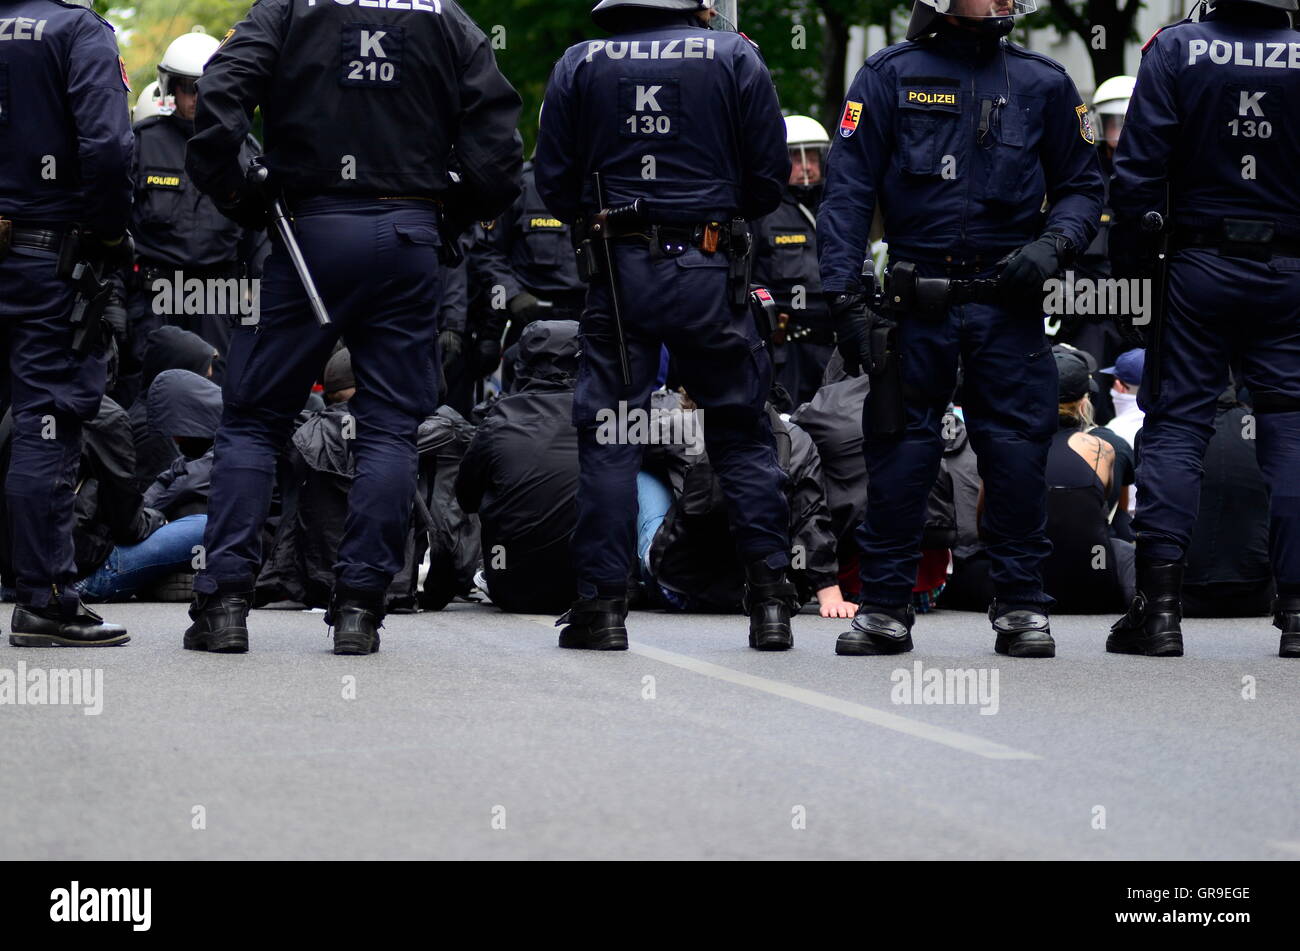 Police Presence At Demonstrations, Police Boilers Stock Photo